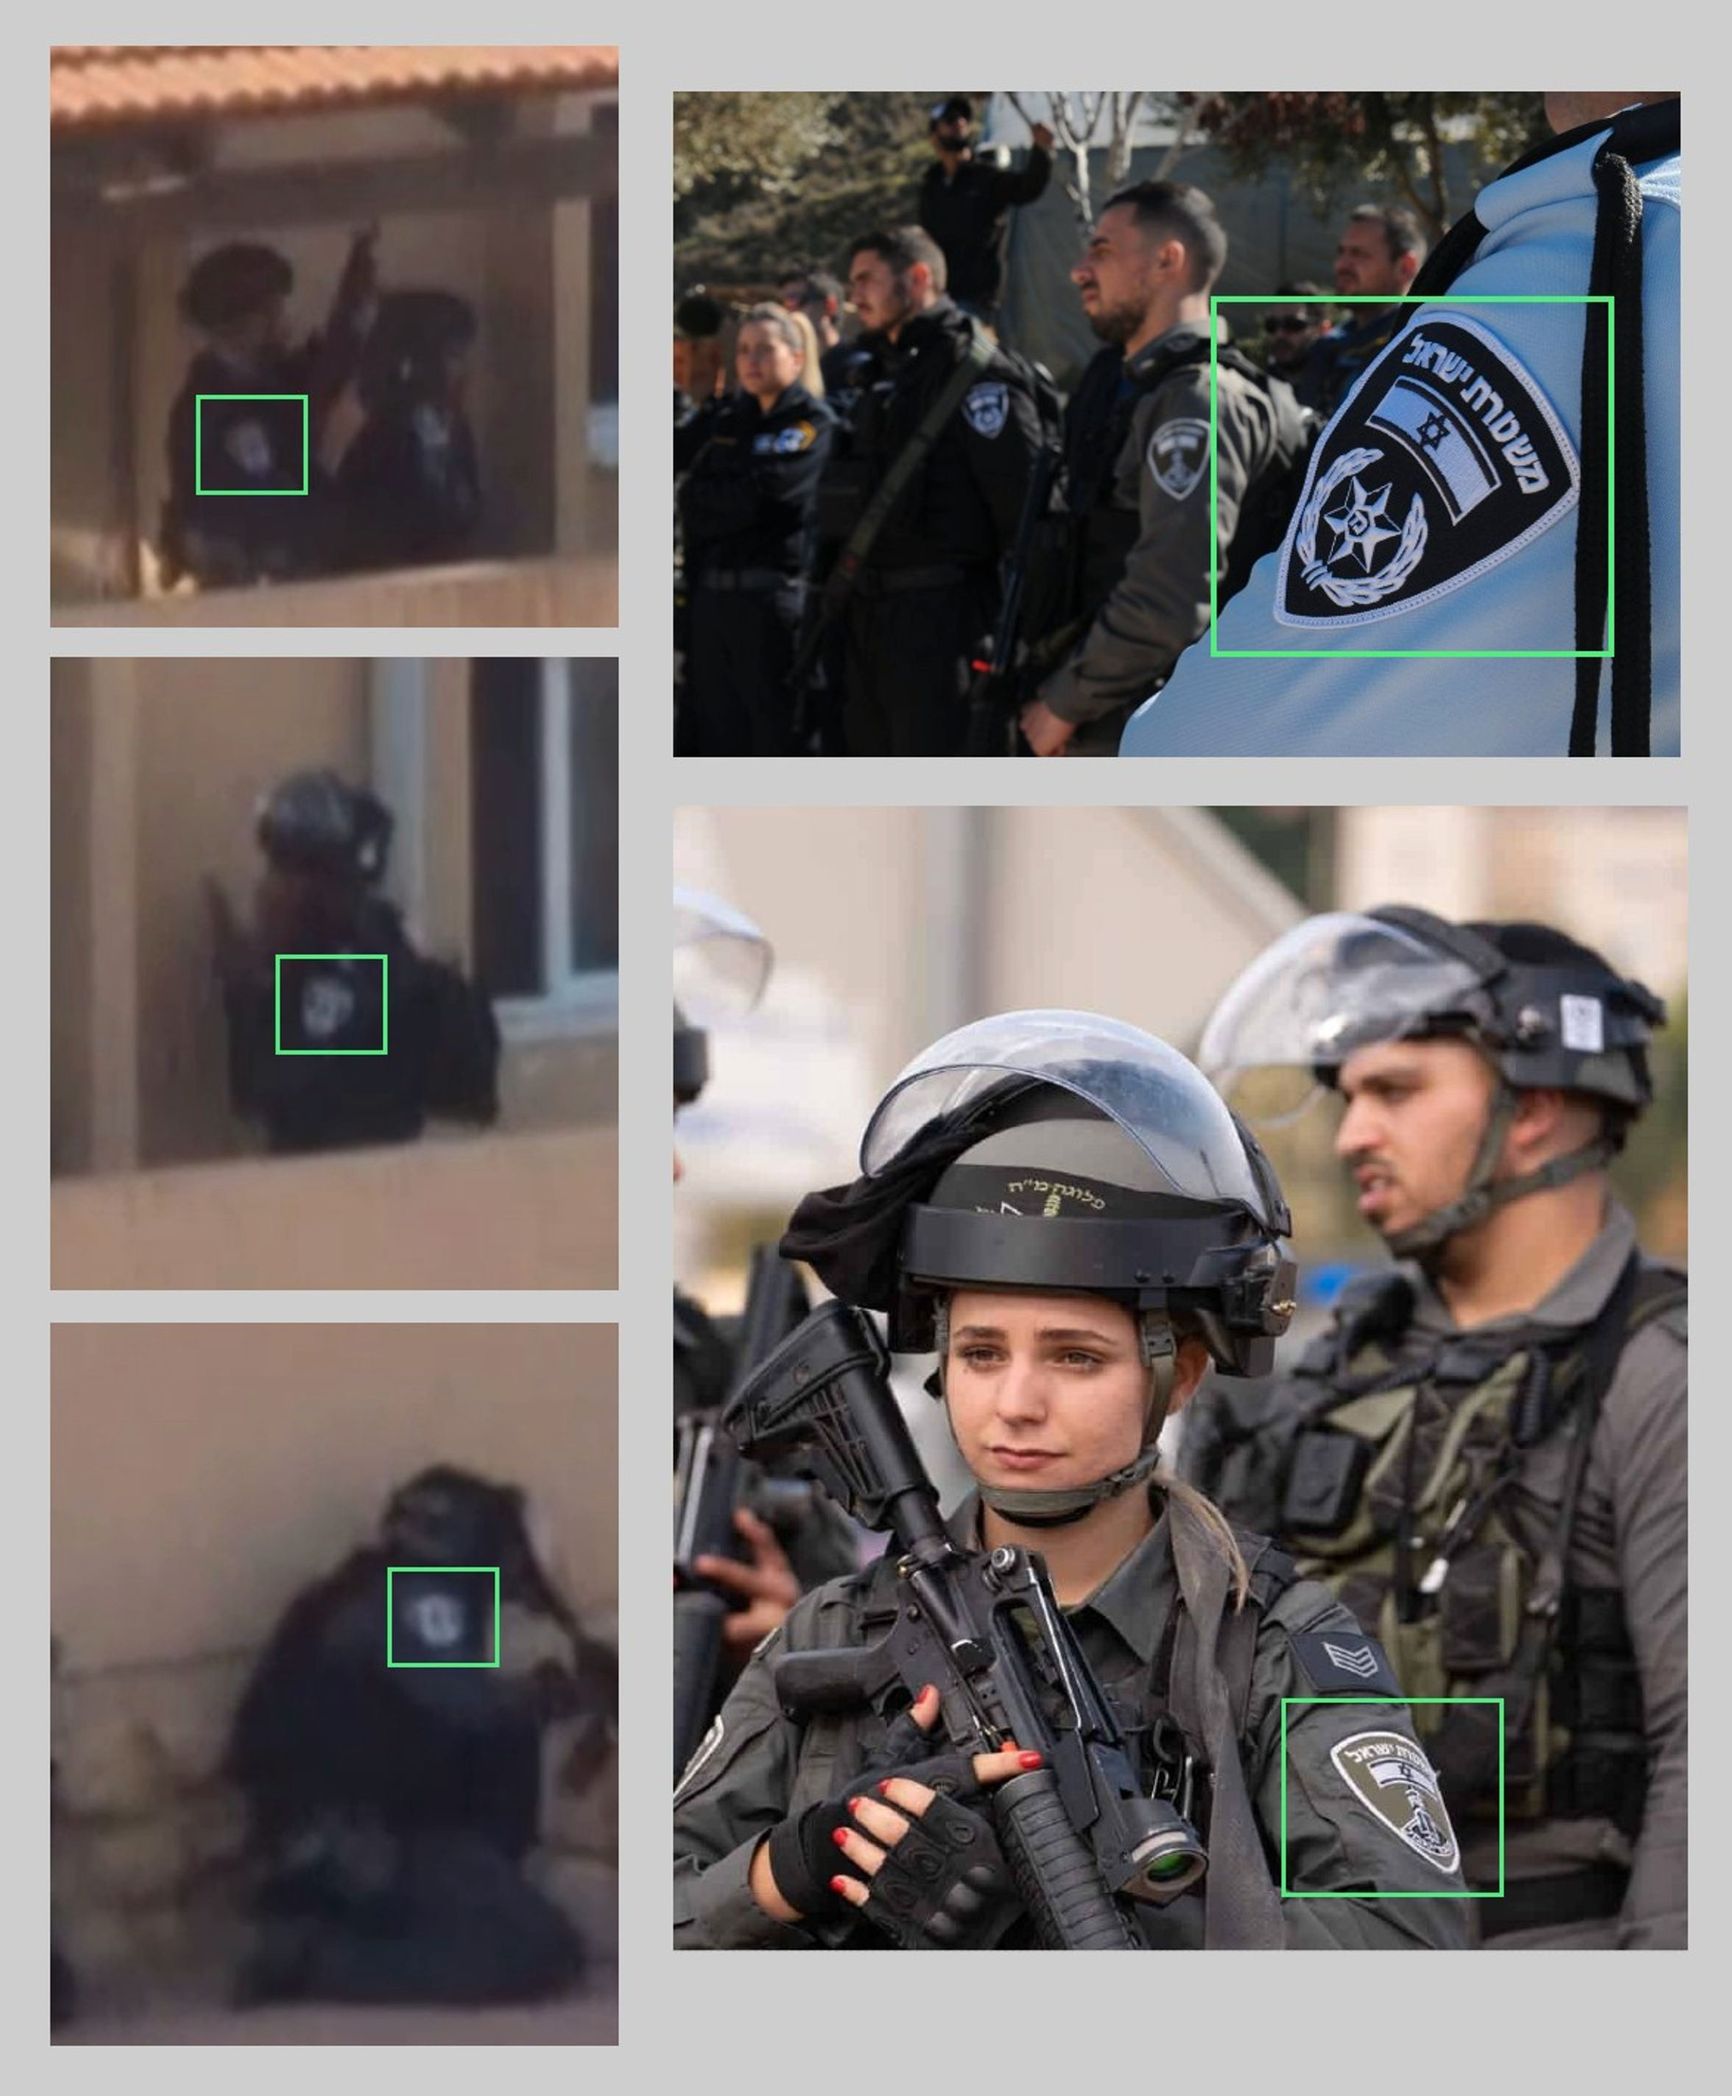 The uniforms of the officers who cordoned off a house in Ofakim vs. Israeli police uniform